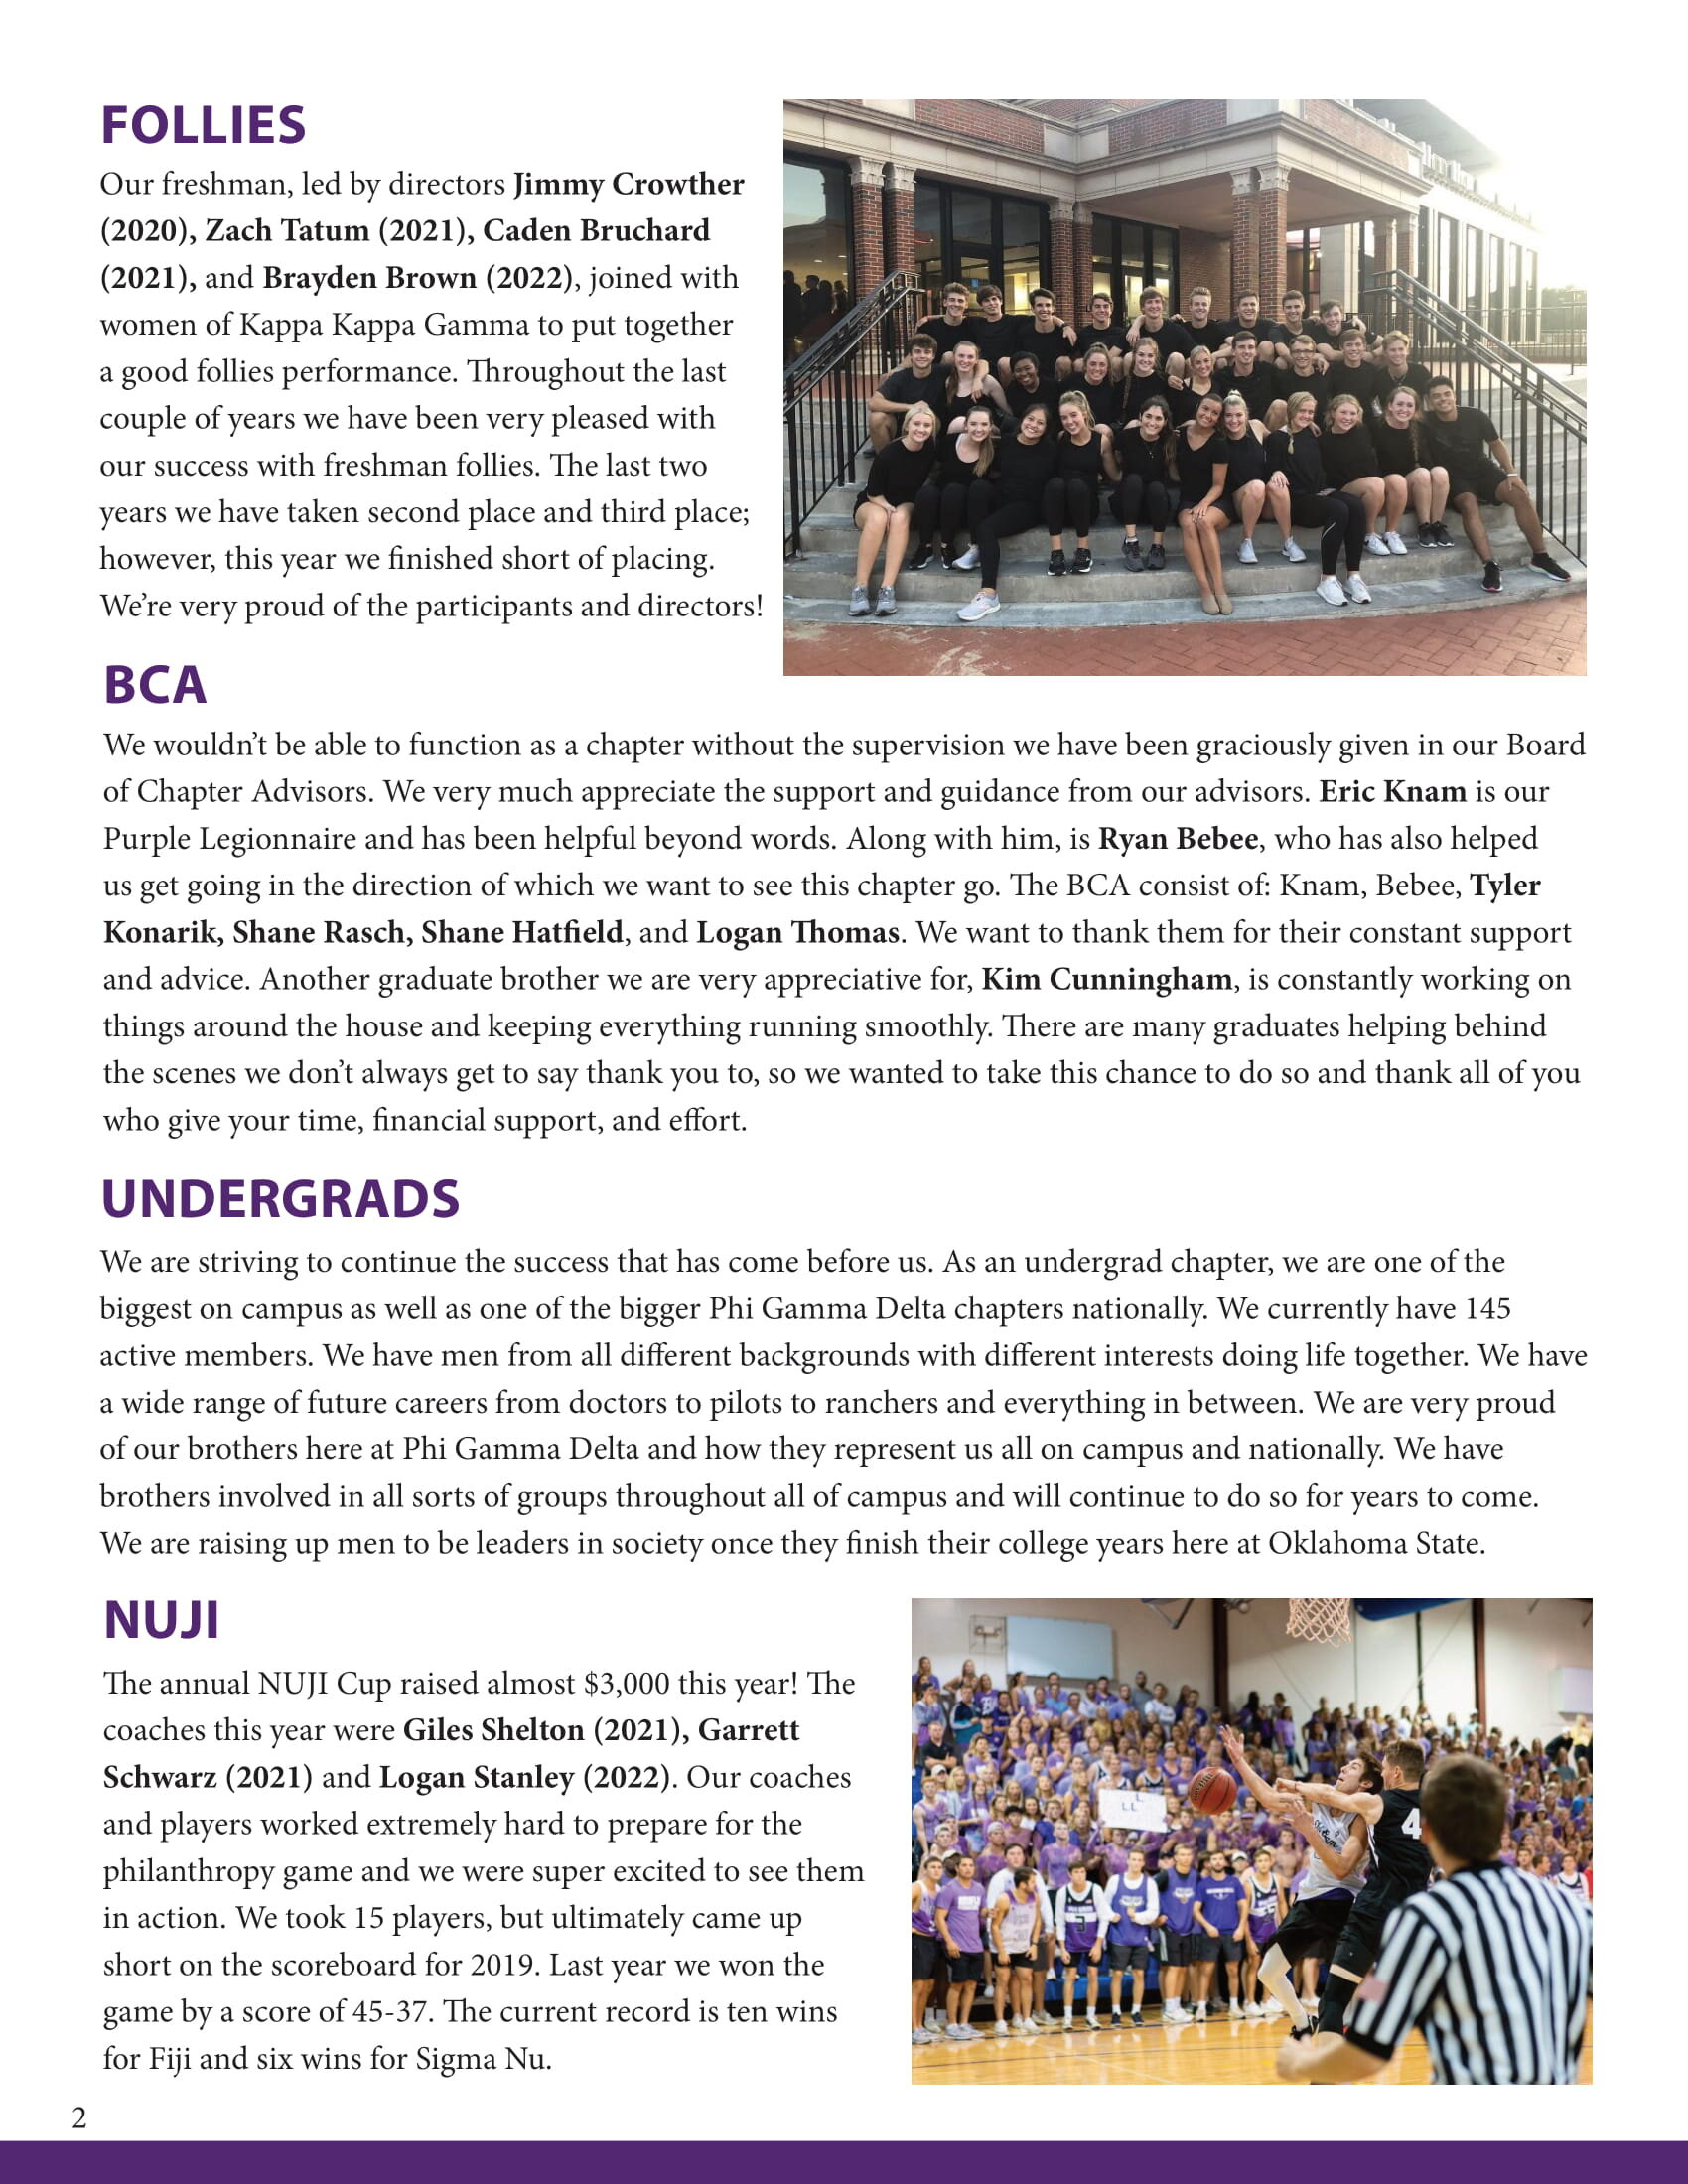 Sigma Omicronicle Fall 2019_FINAL-pages-1-6-2.jpg